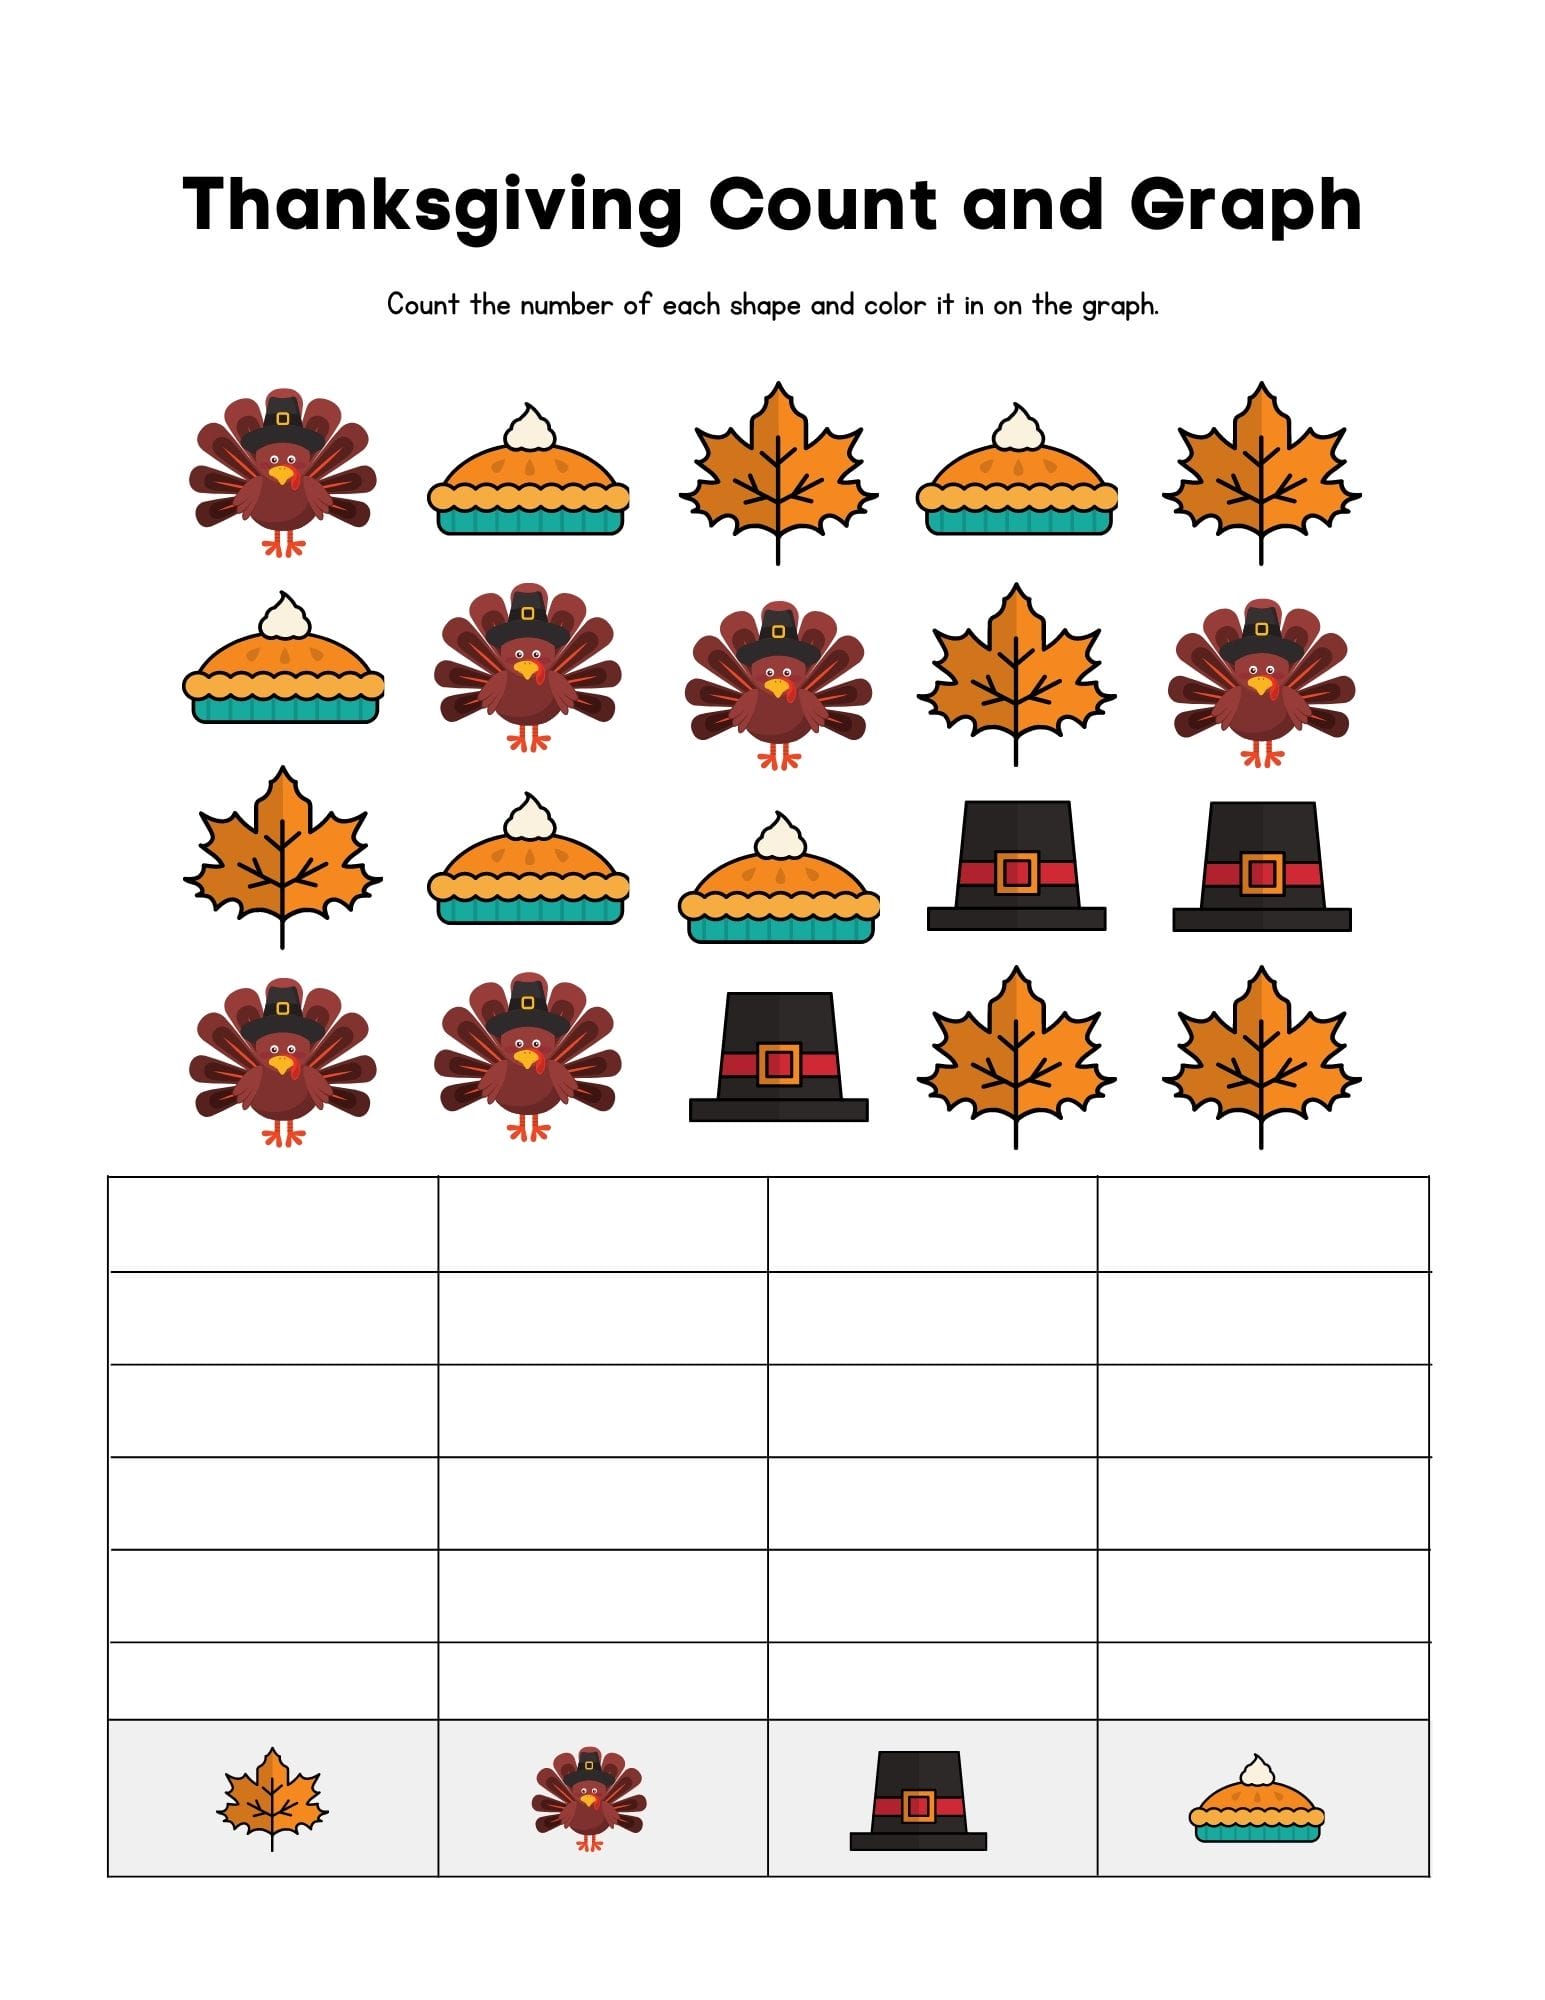 Thanksgiving Count and Graph Worksheet